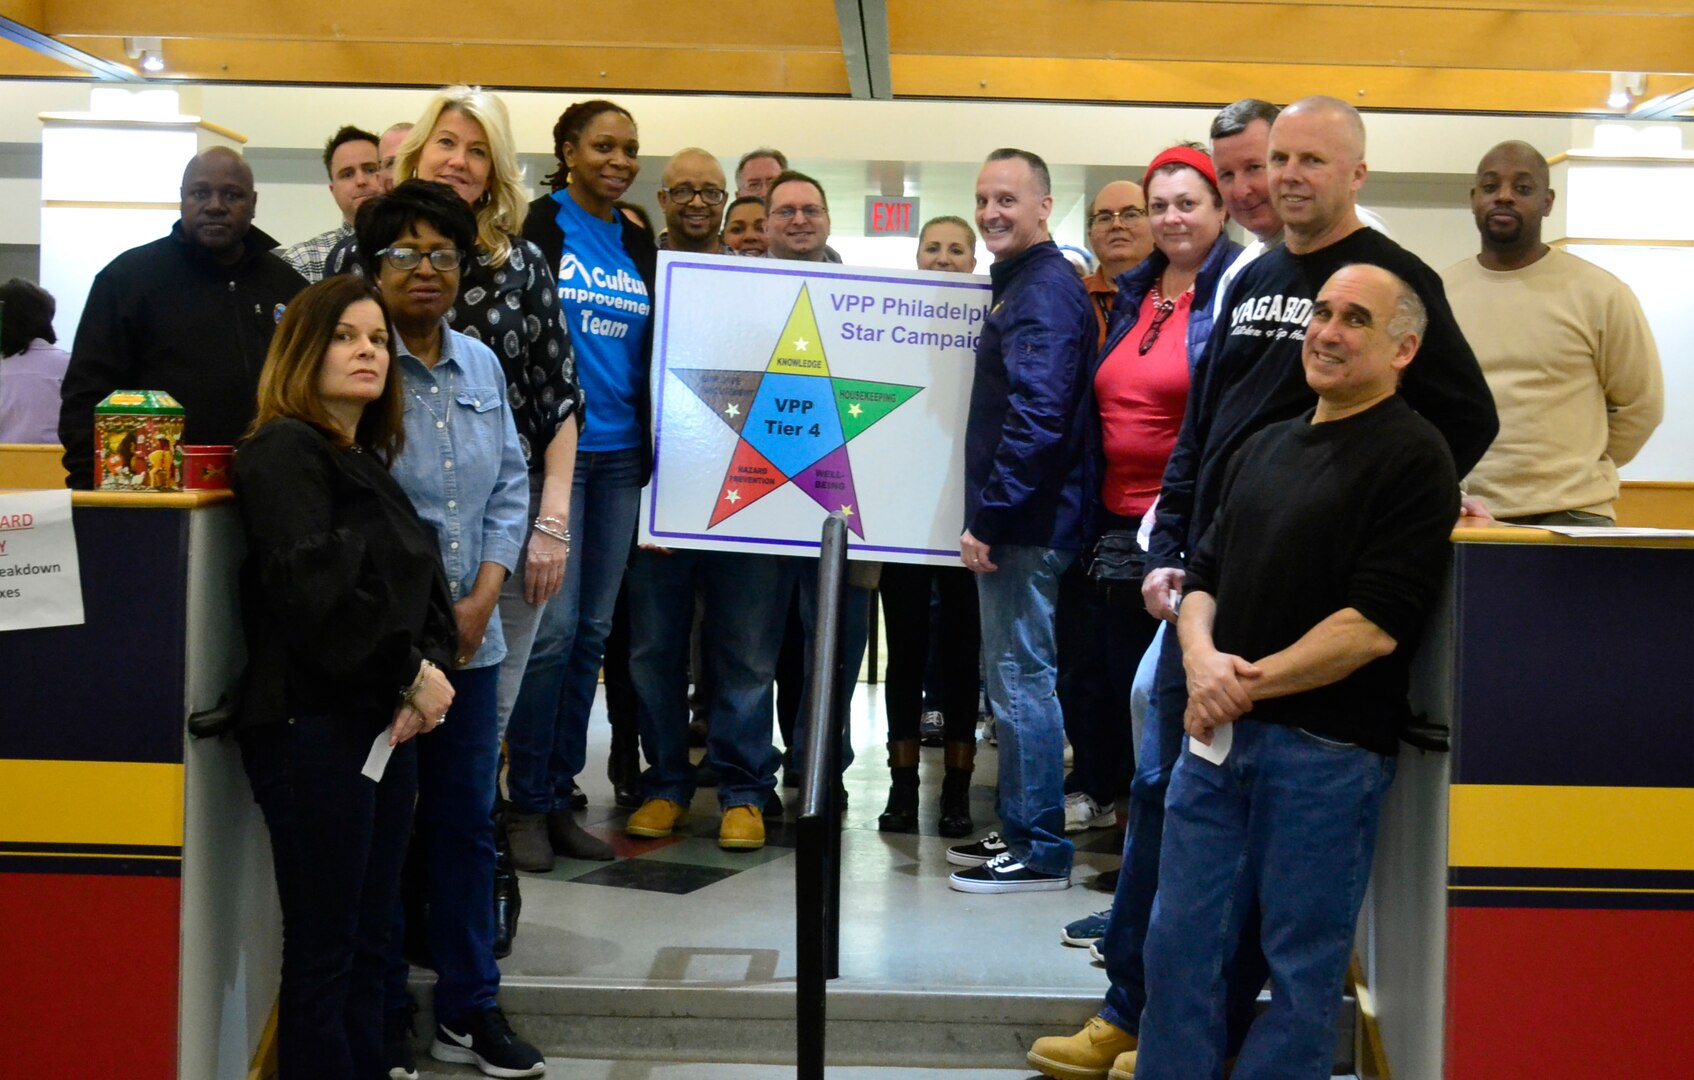 DLA Troop Support Construction and Equipment supply chain employees pose for a photo during the spring clean-up event in Building 3 March 20, 2019 in Philadelphia. The employees participated in the housekeeping component of the VPP program, an OSHA led initiative, that encourages cooperative efforts between management, employees and unions to reduce mishaps, pest and improve workplace safety. (Photo by Alexandria Brimage-Gray).